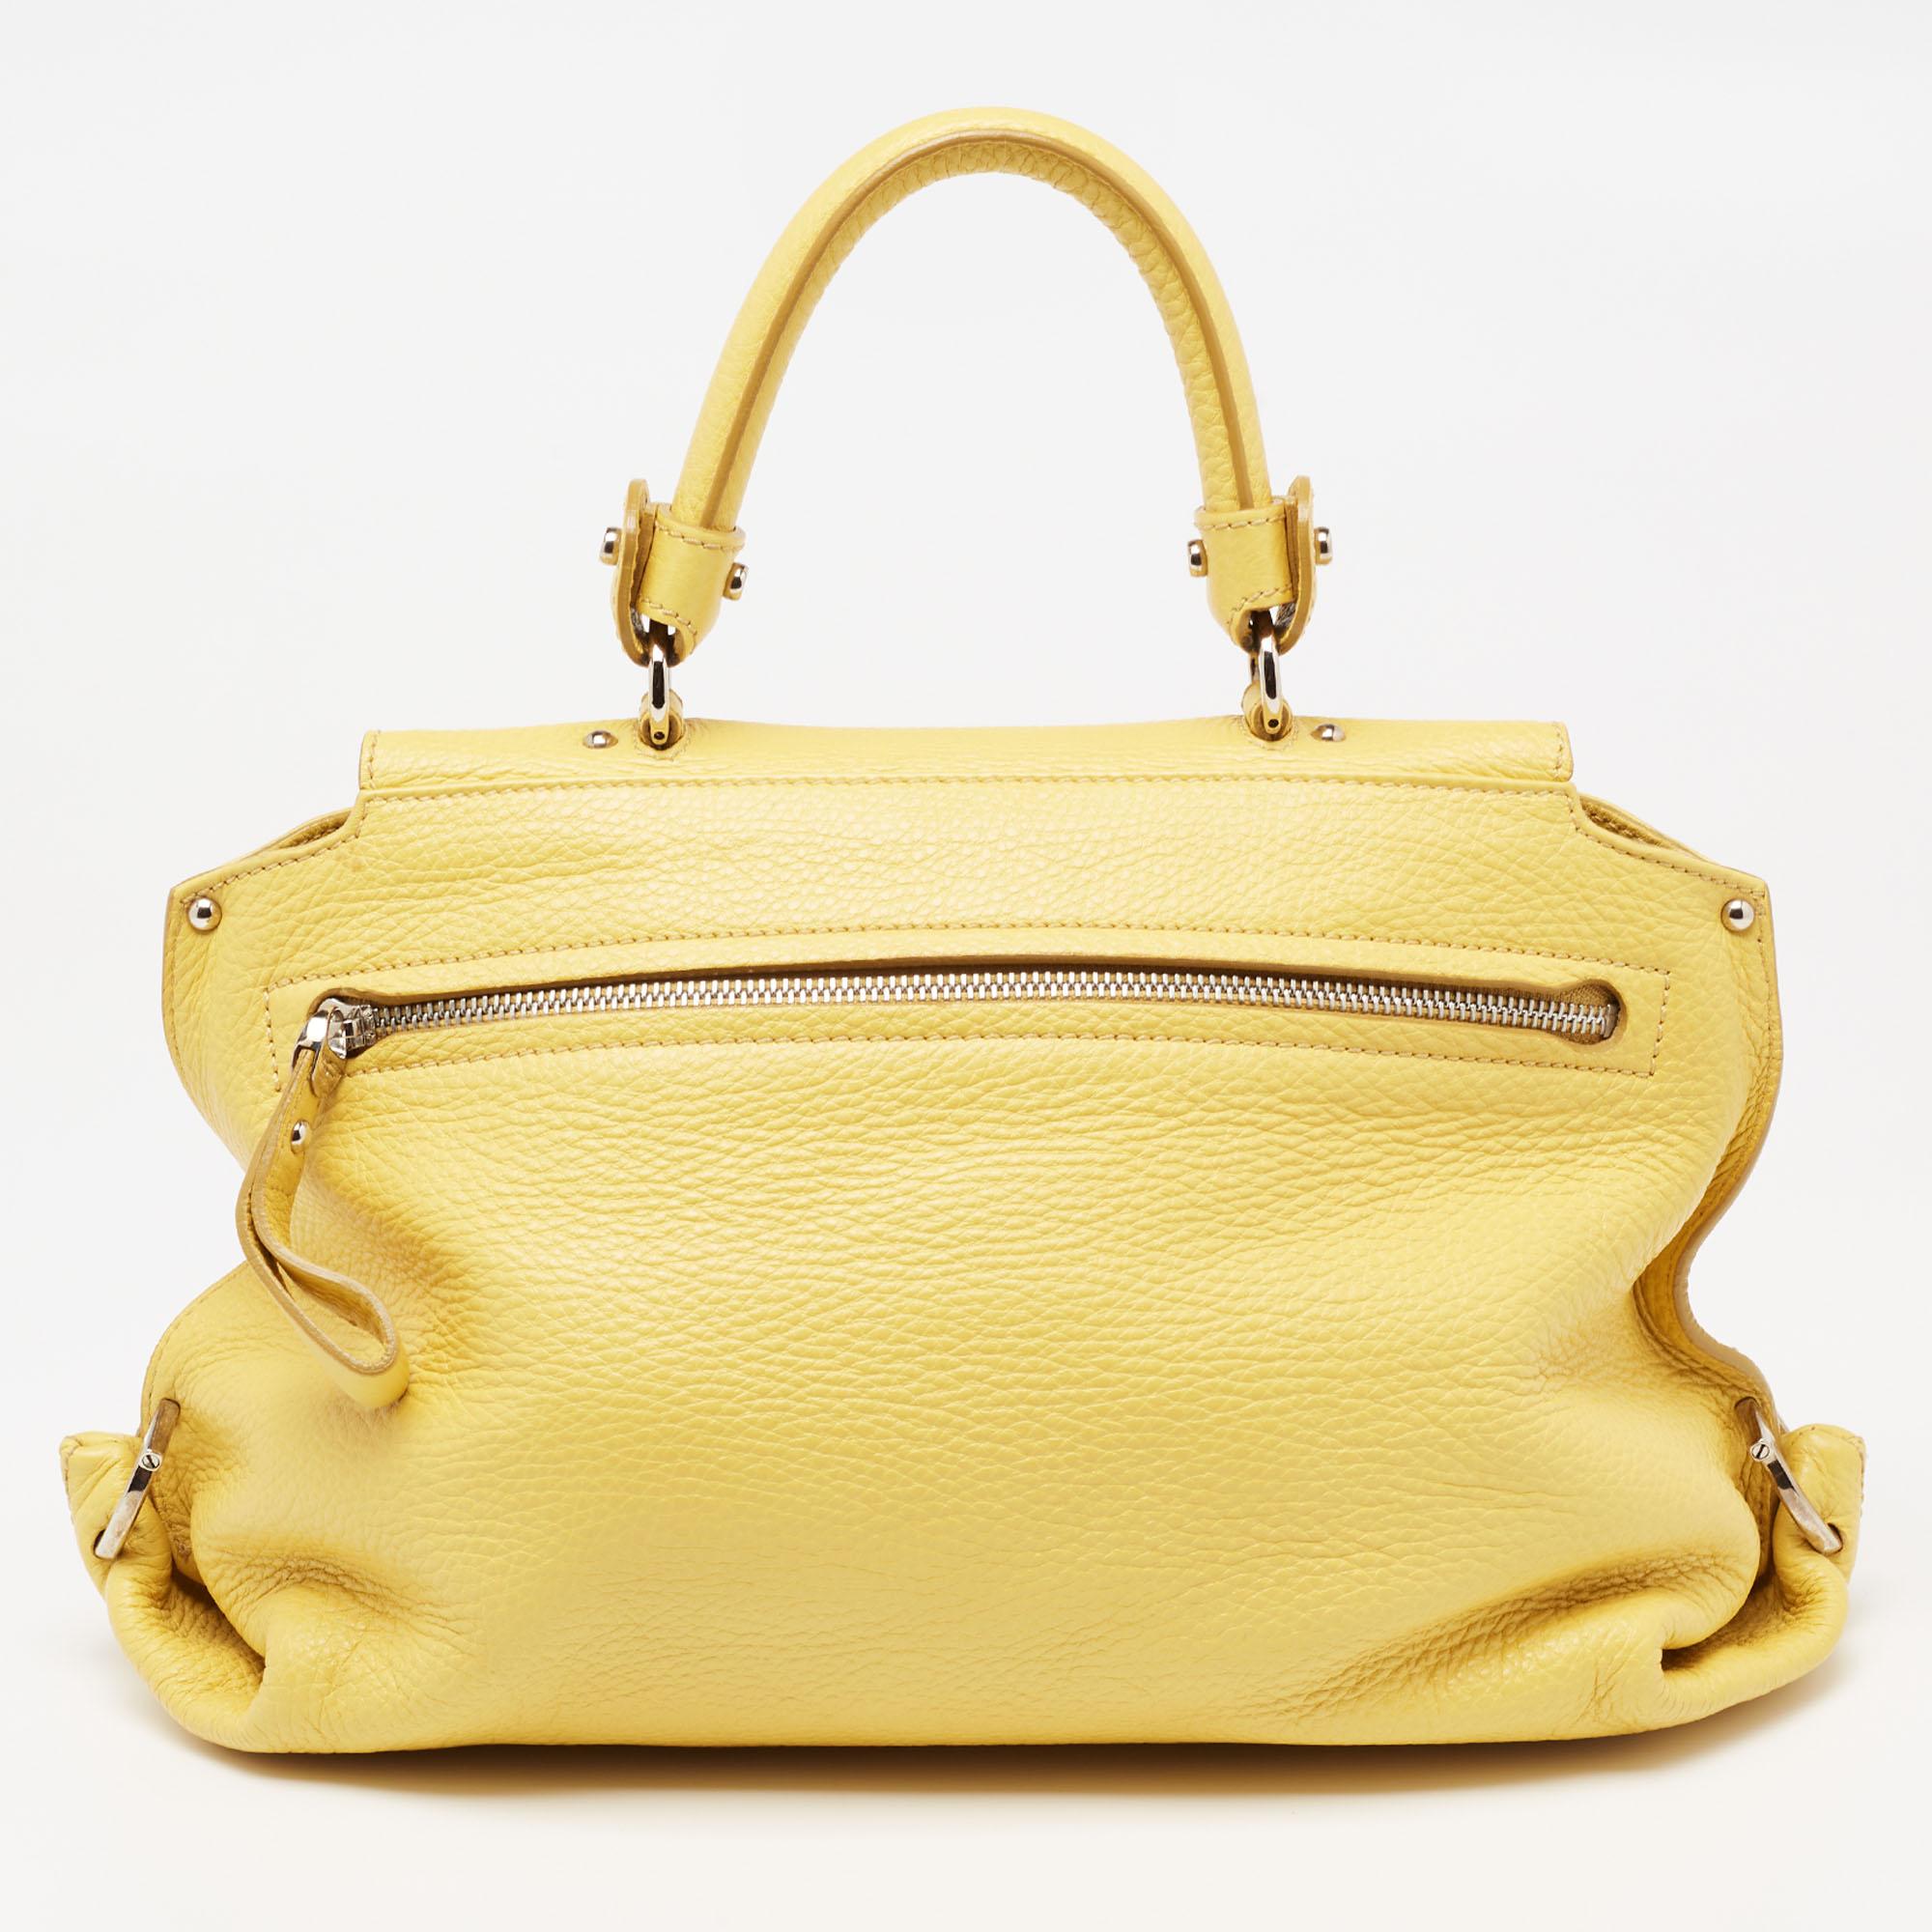 The Sofia is from the Salvatore Ferragamo's Summer/Spring 2009 collection, named after Italian actress Sophia Loren. Infused with signature details, this bag has an incredible combination of contemporary shape and timeless essence. The foldover at